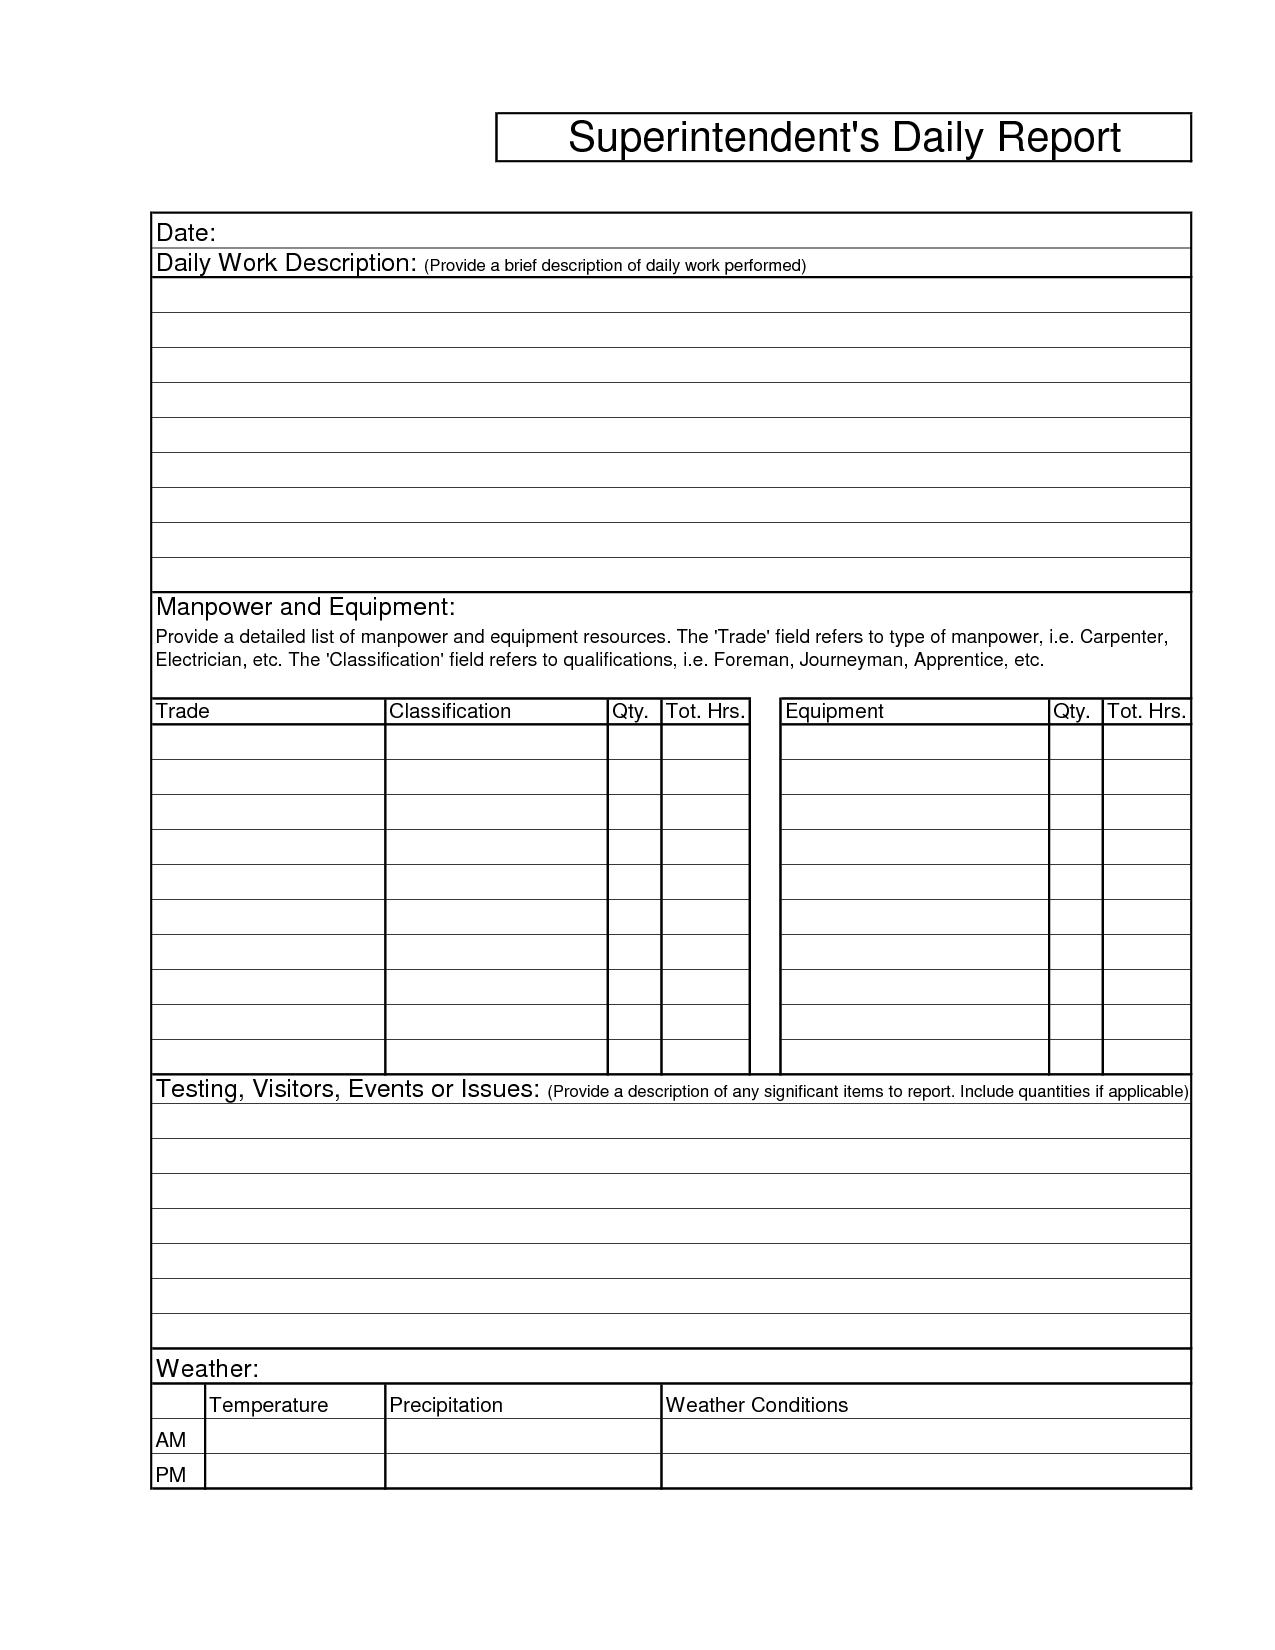 Printable Blank Superintendents Daily Report Sample And Throughout Superintendent Daily Report Template